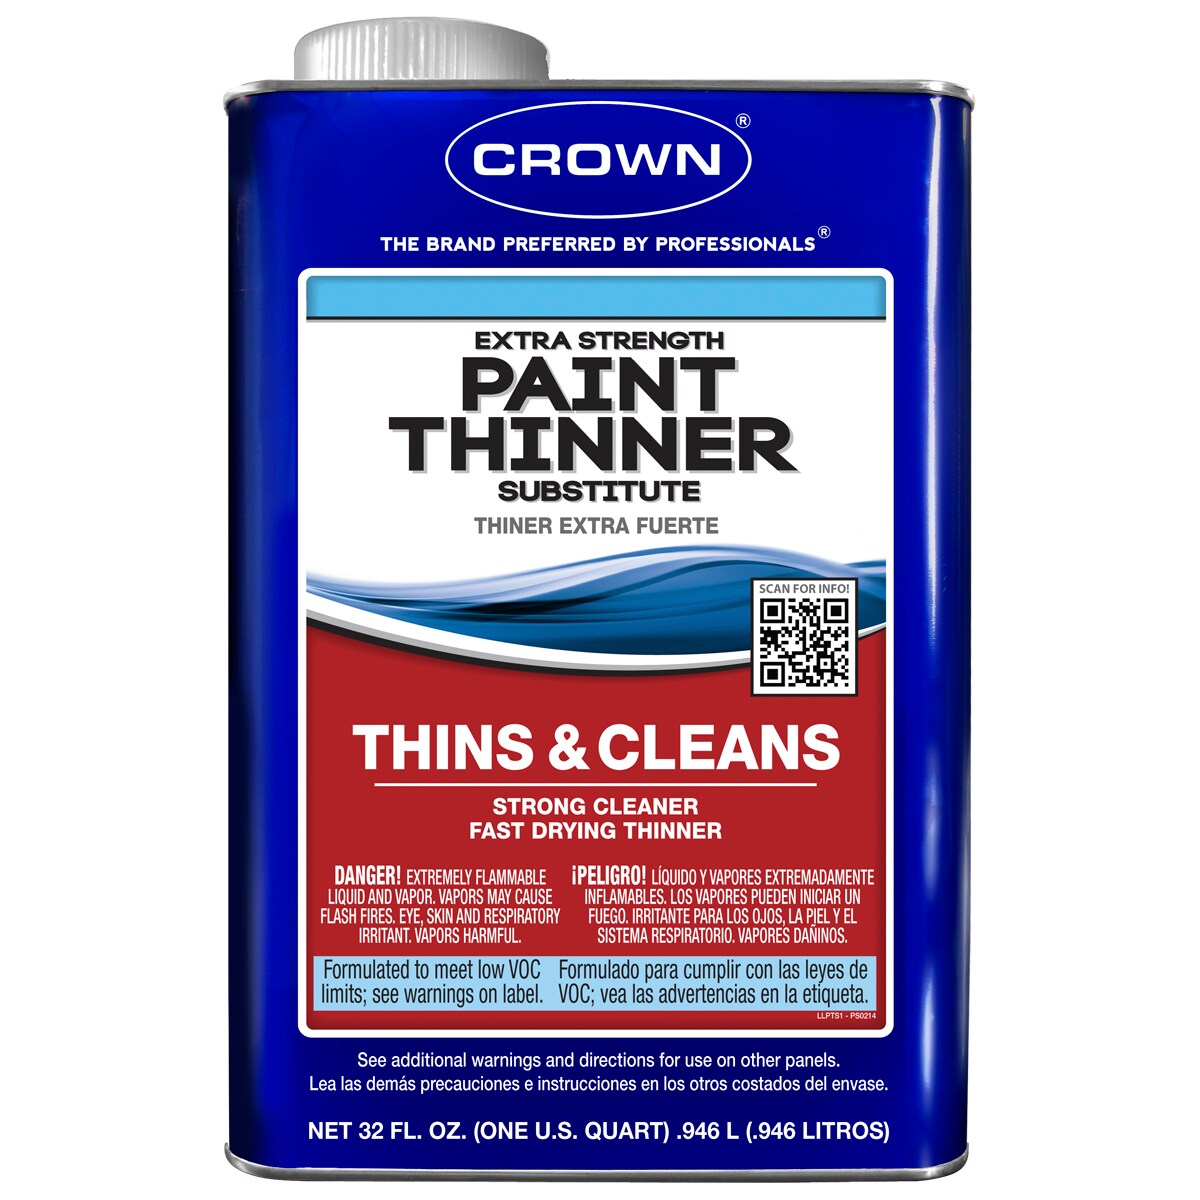 SHERWIN WILLIAMS K01661600-16 Gallon size Brush and roller cleaner Odorless  paint thinner